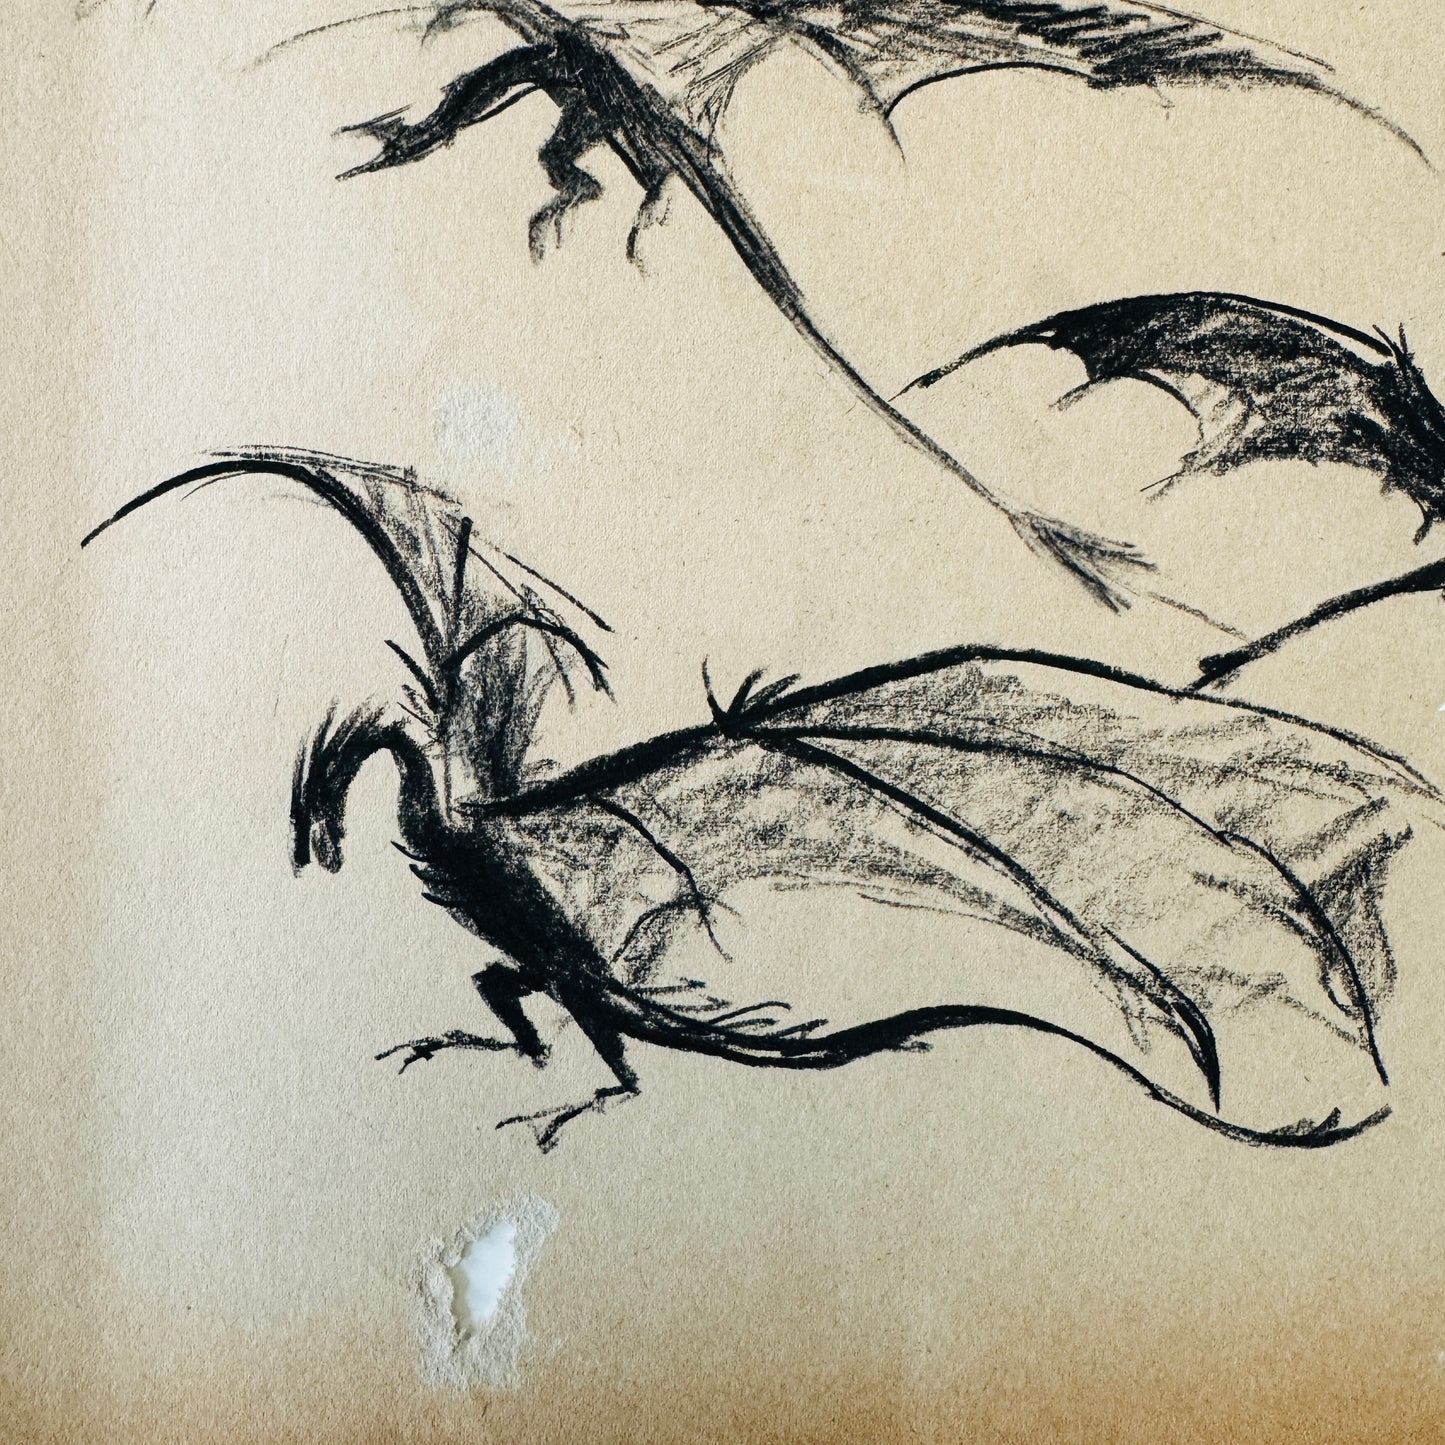 Dragons - study, charcoal on paper